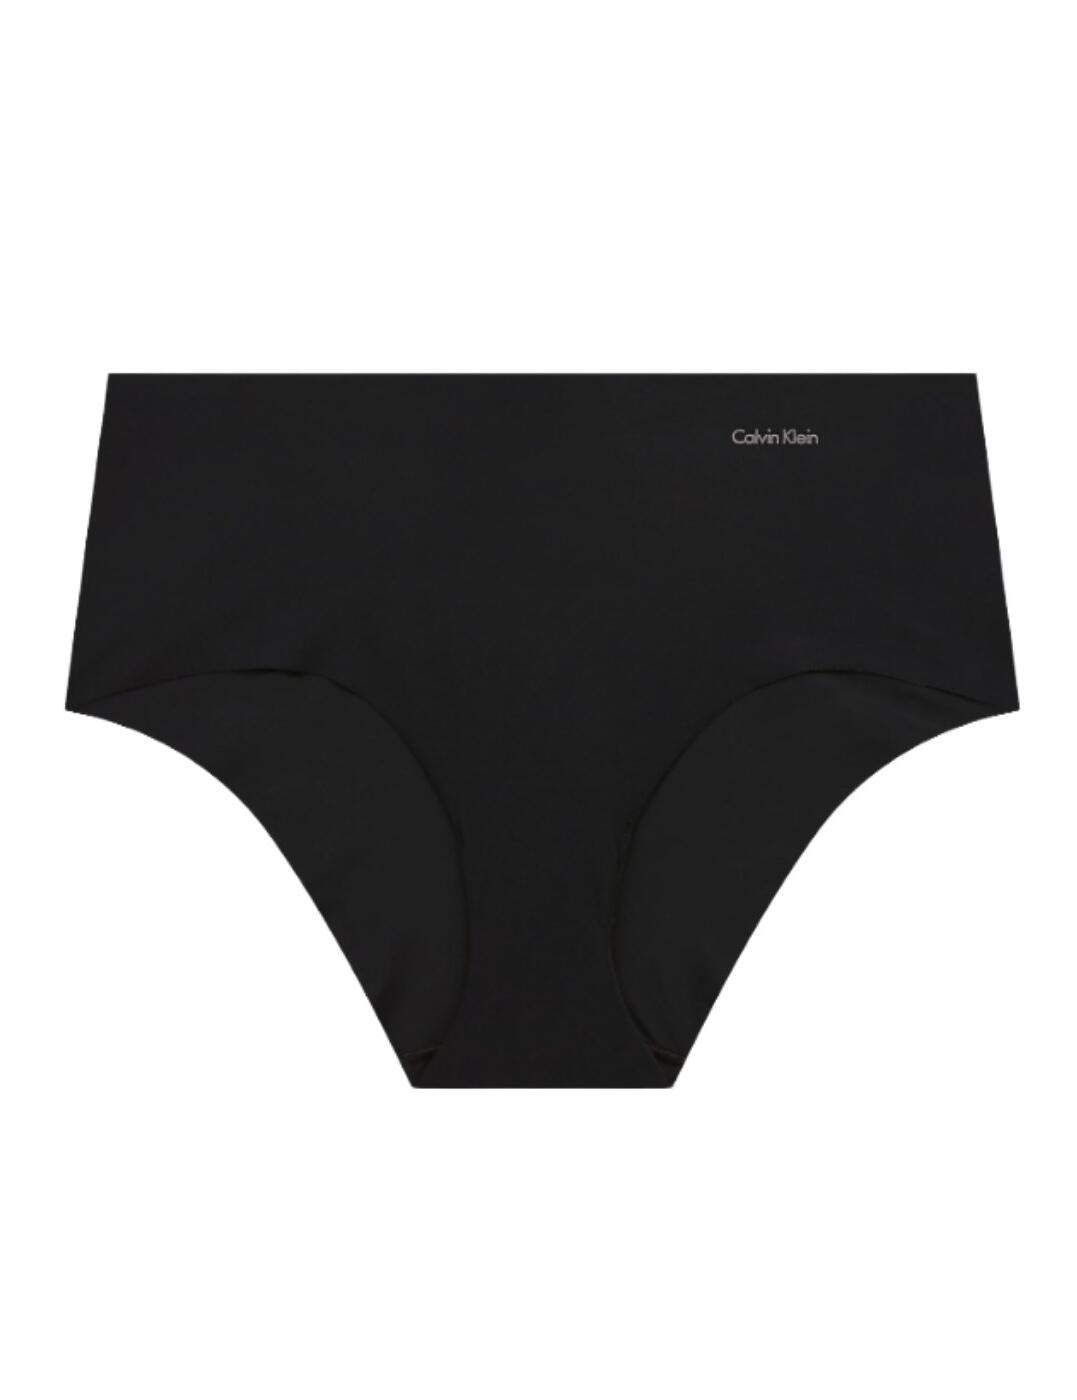 Calvin Klein - INVISIBLES HIPSTER in Black